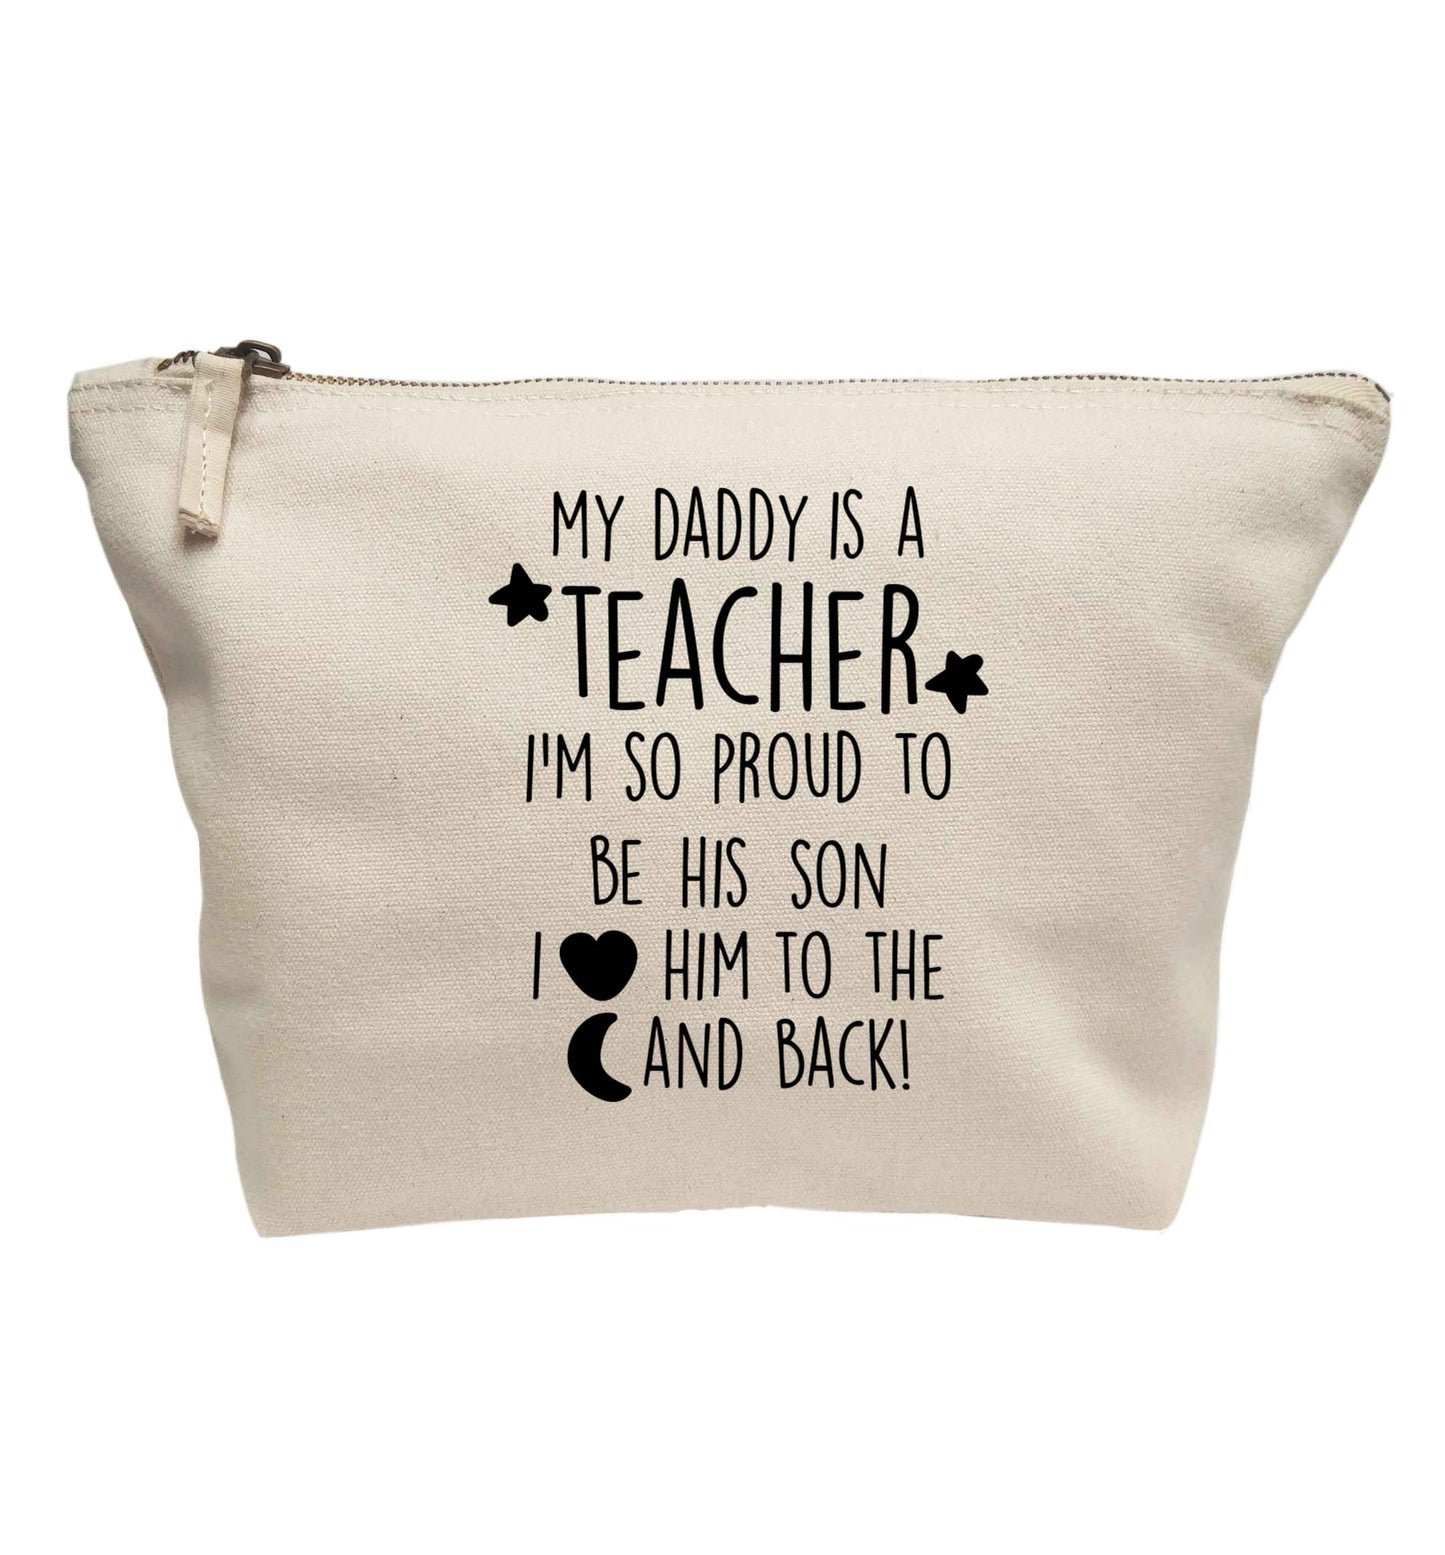 My daddy is a teacher I'm so proud to be his son I love her to the moon and back | Makeup / wash bag